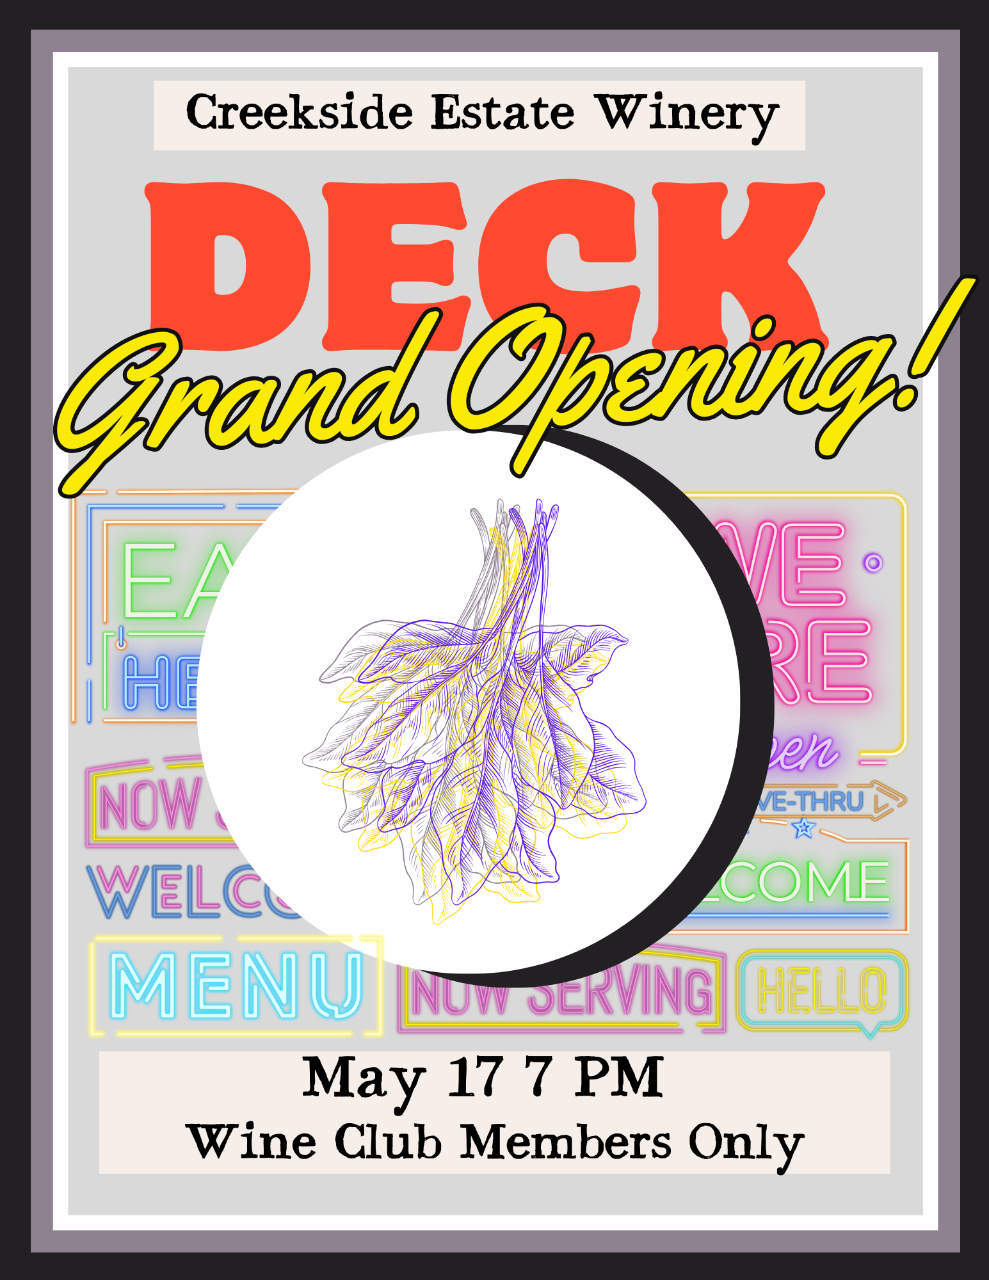 Deck Grand Opening